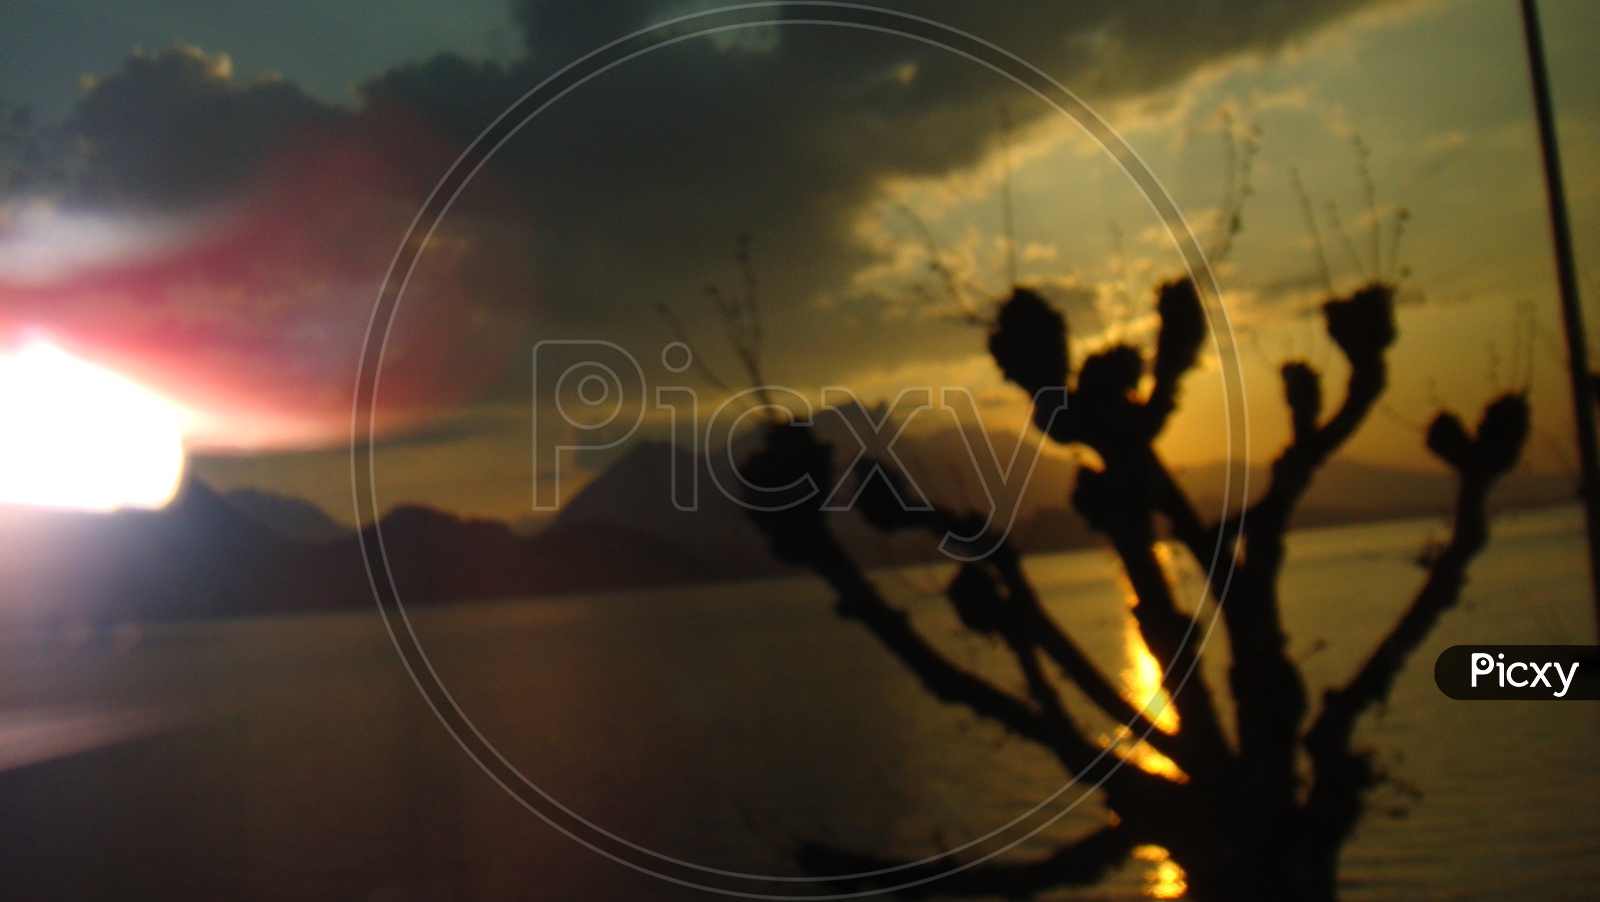 Silhouette of flower buds during sunset